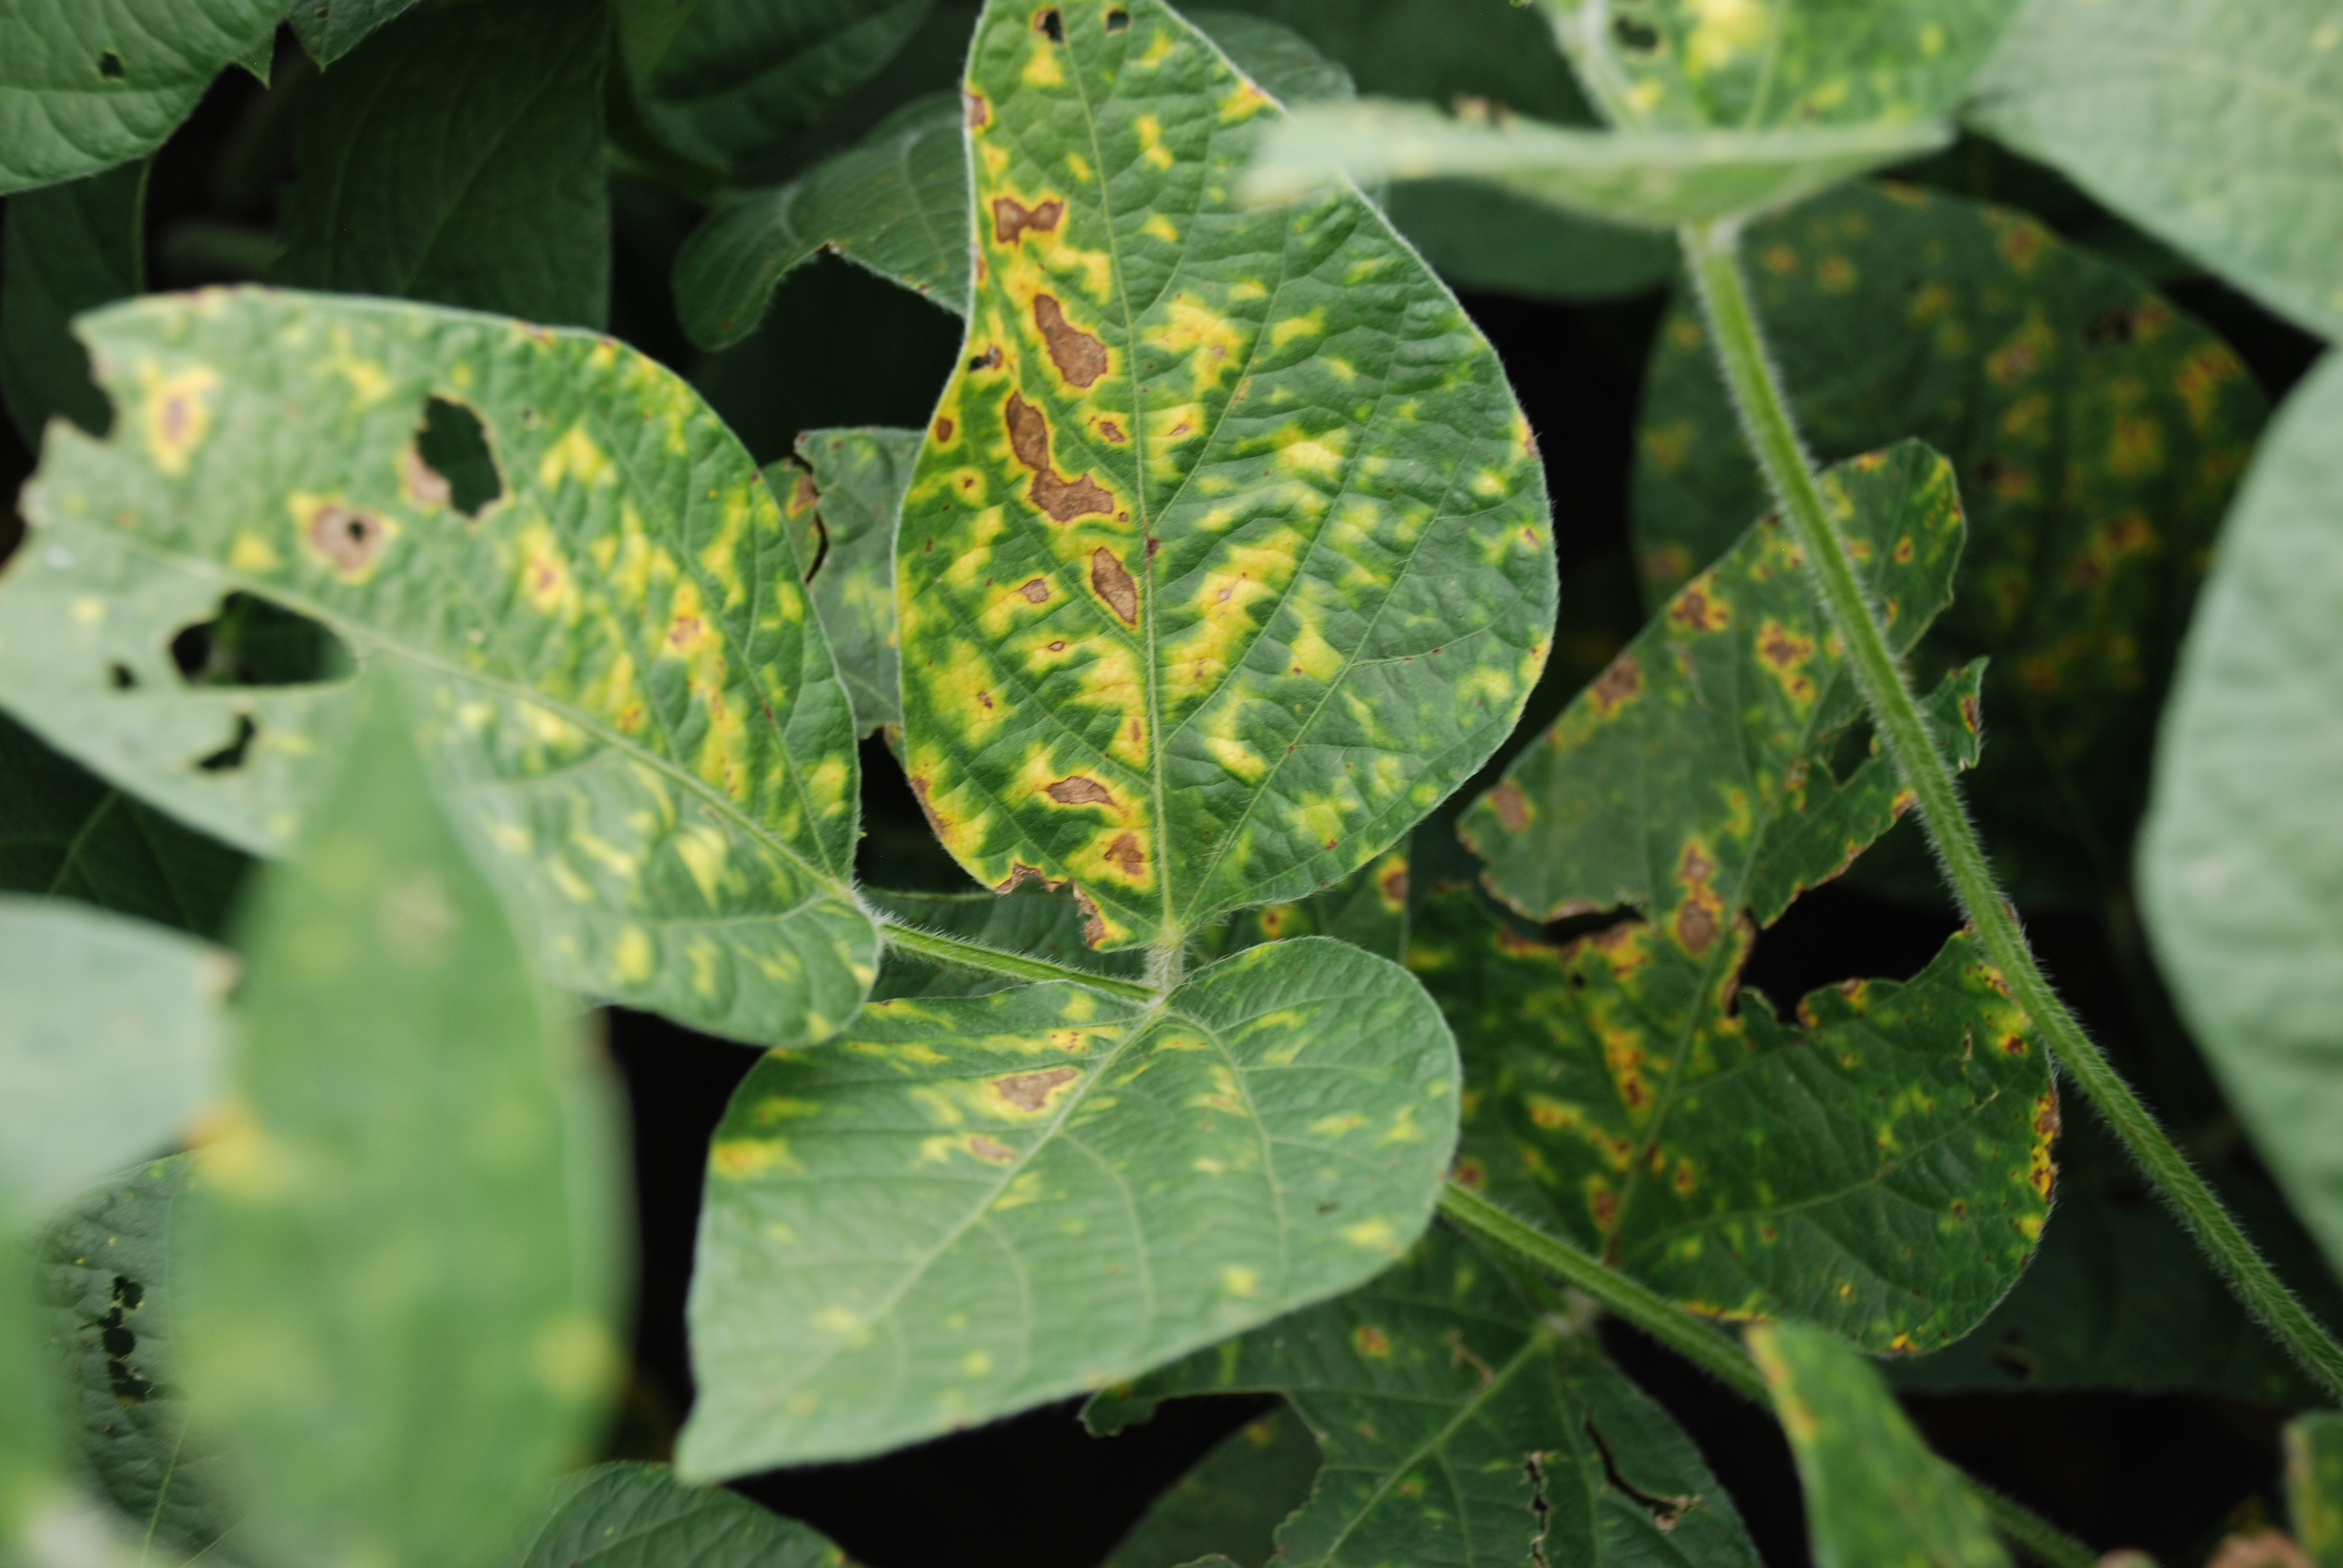 An agronomic image showing the effects of sudden death syndrome on soybean plants.